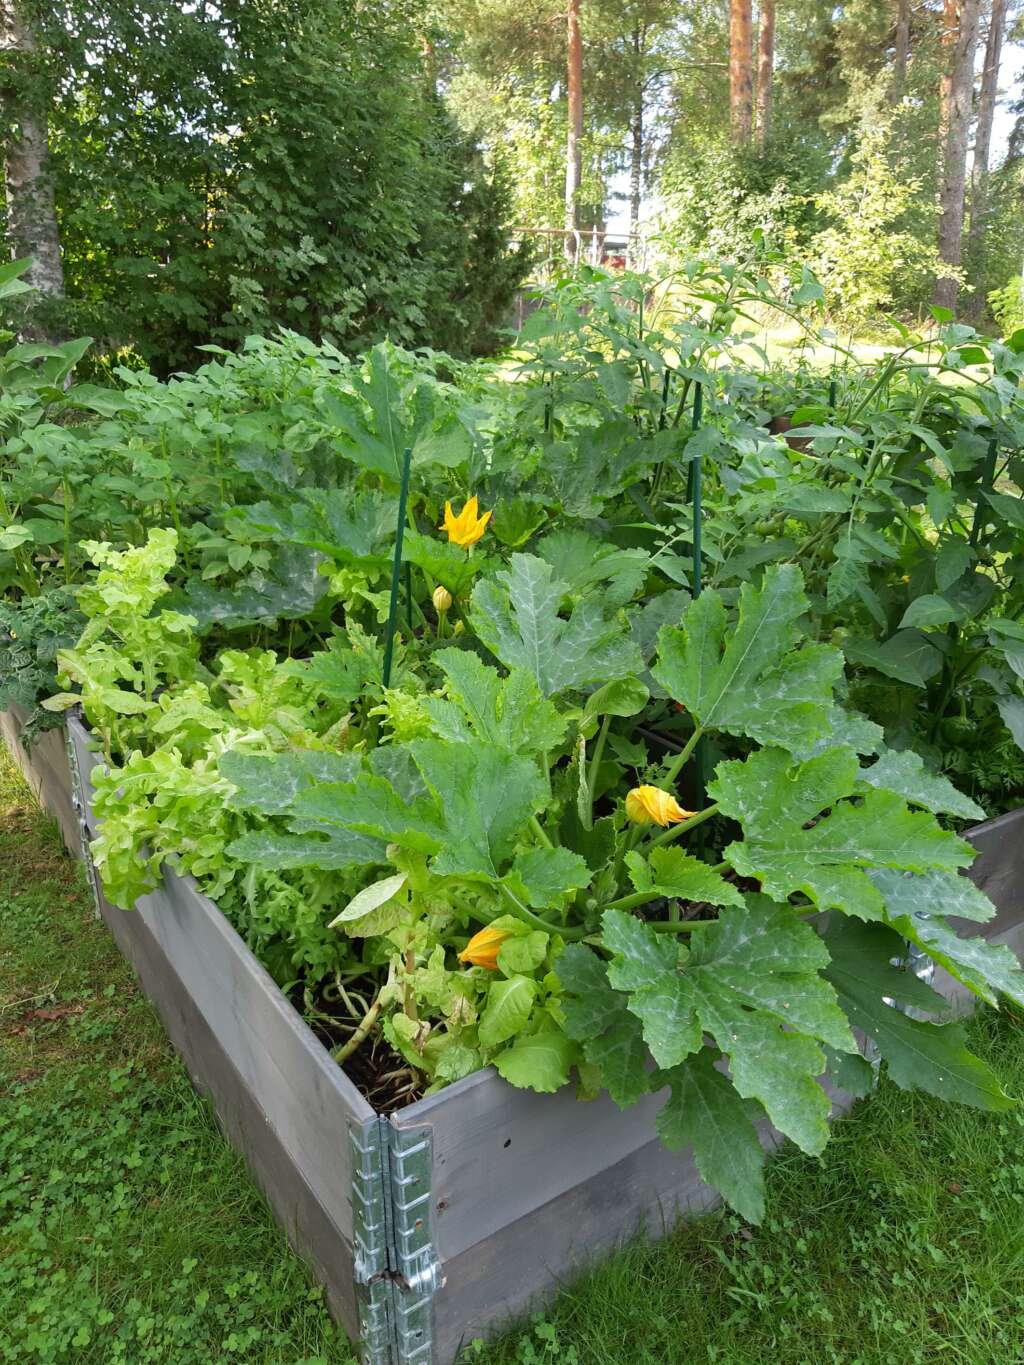 Wooden cultivation boxes with courgettes, lettuce and other vegetables growing.